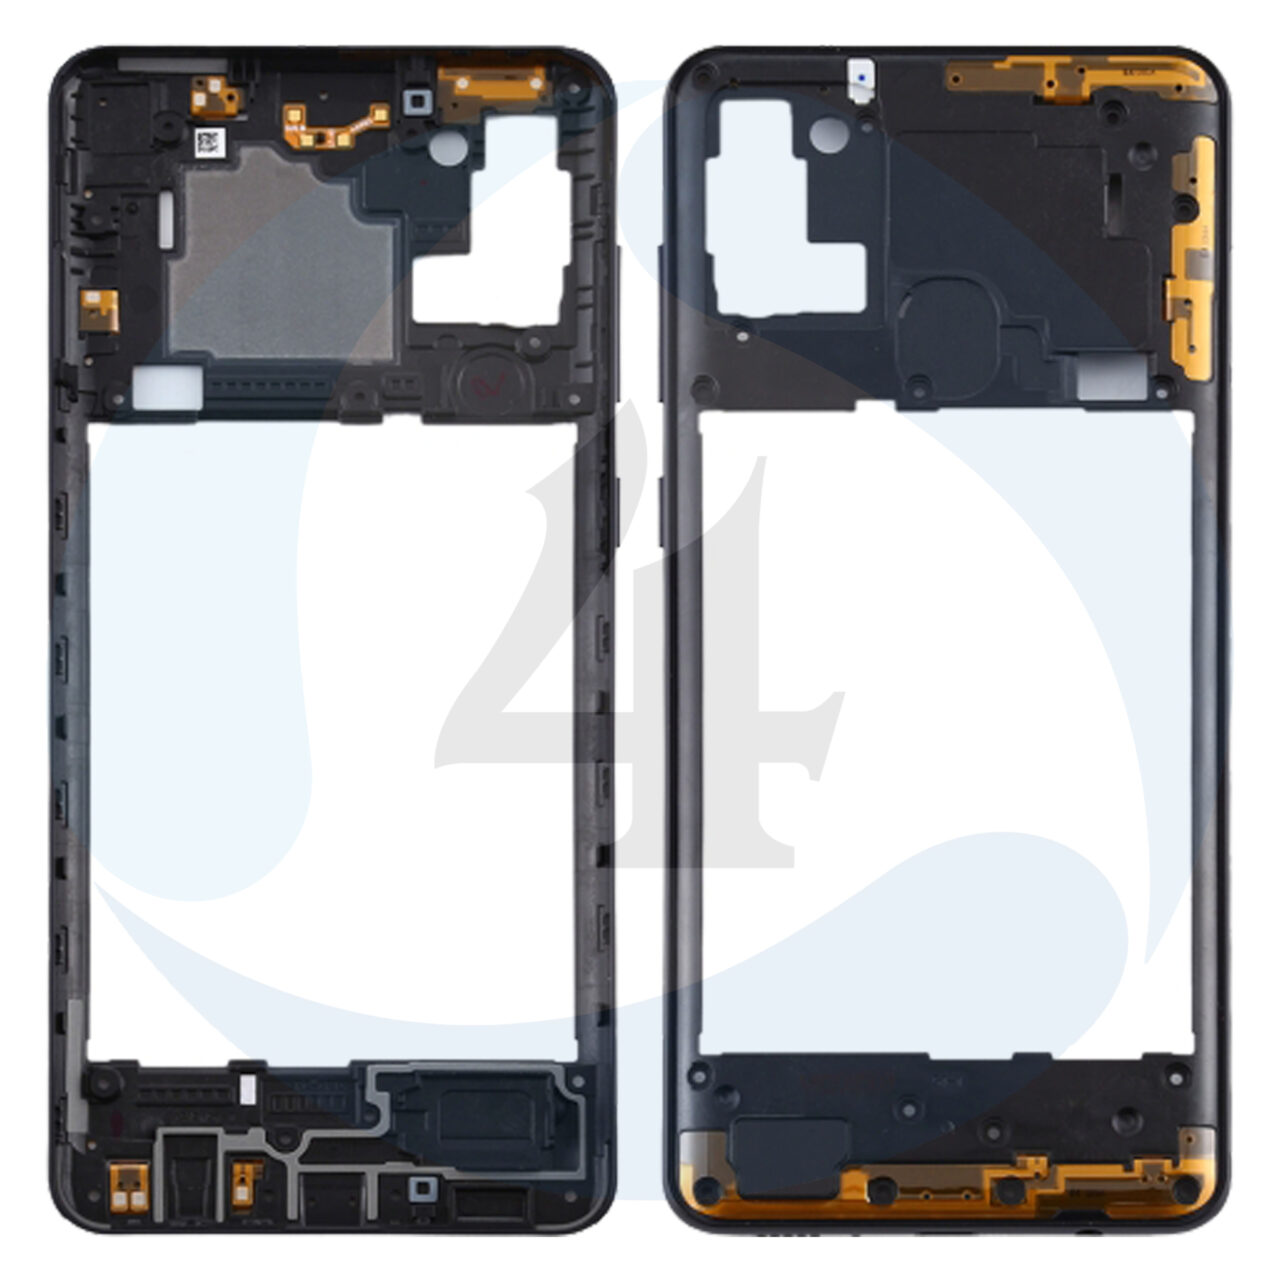 Samsung Galaxy A21s SM A217 F DS Middle Frame Bezel Plate Cover black